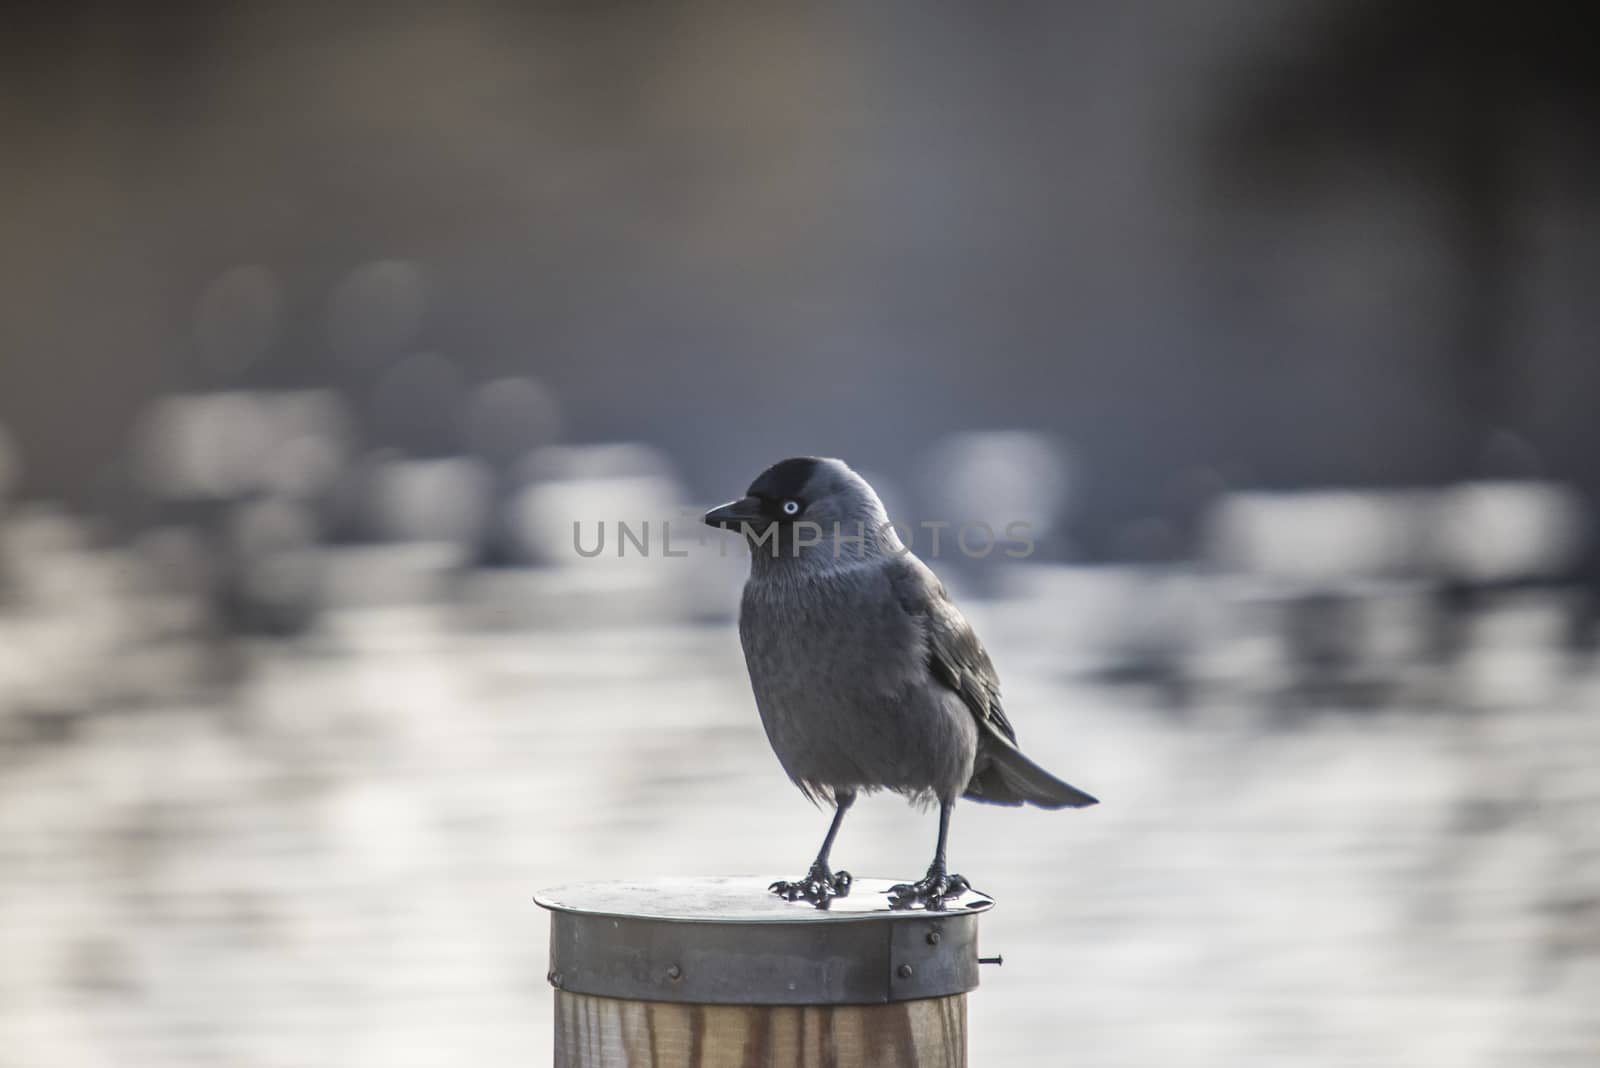 the western jackdaw (corvus monedula), sometimes known as the eurasian jackdaw, european jackdaw or simply jackdaw, is a passerine bird in the crow family, the image is shot at the tista river in Halden december 2012